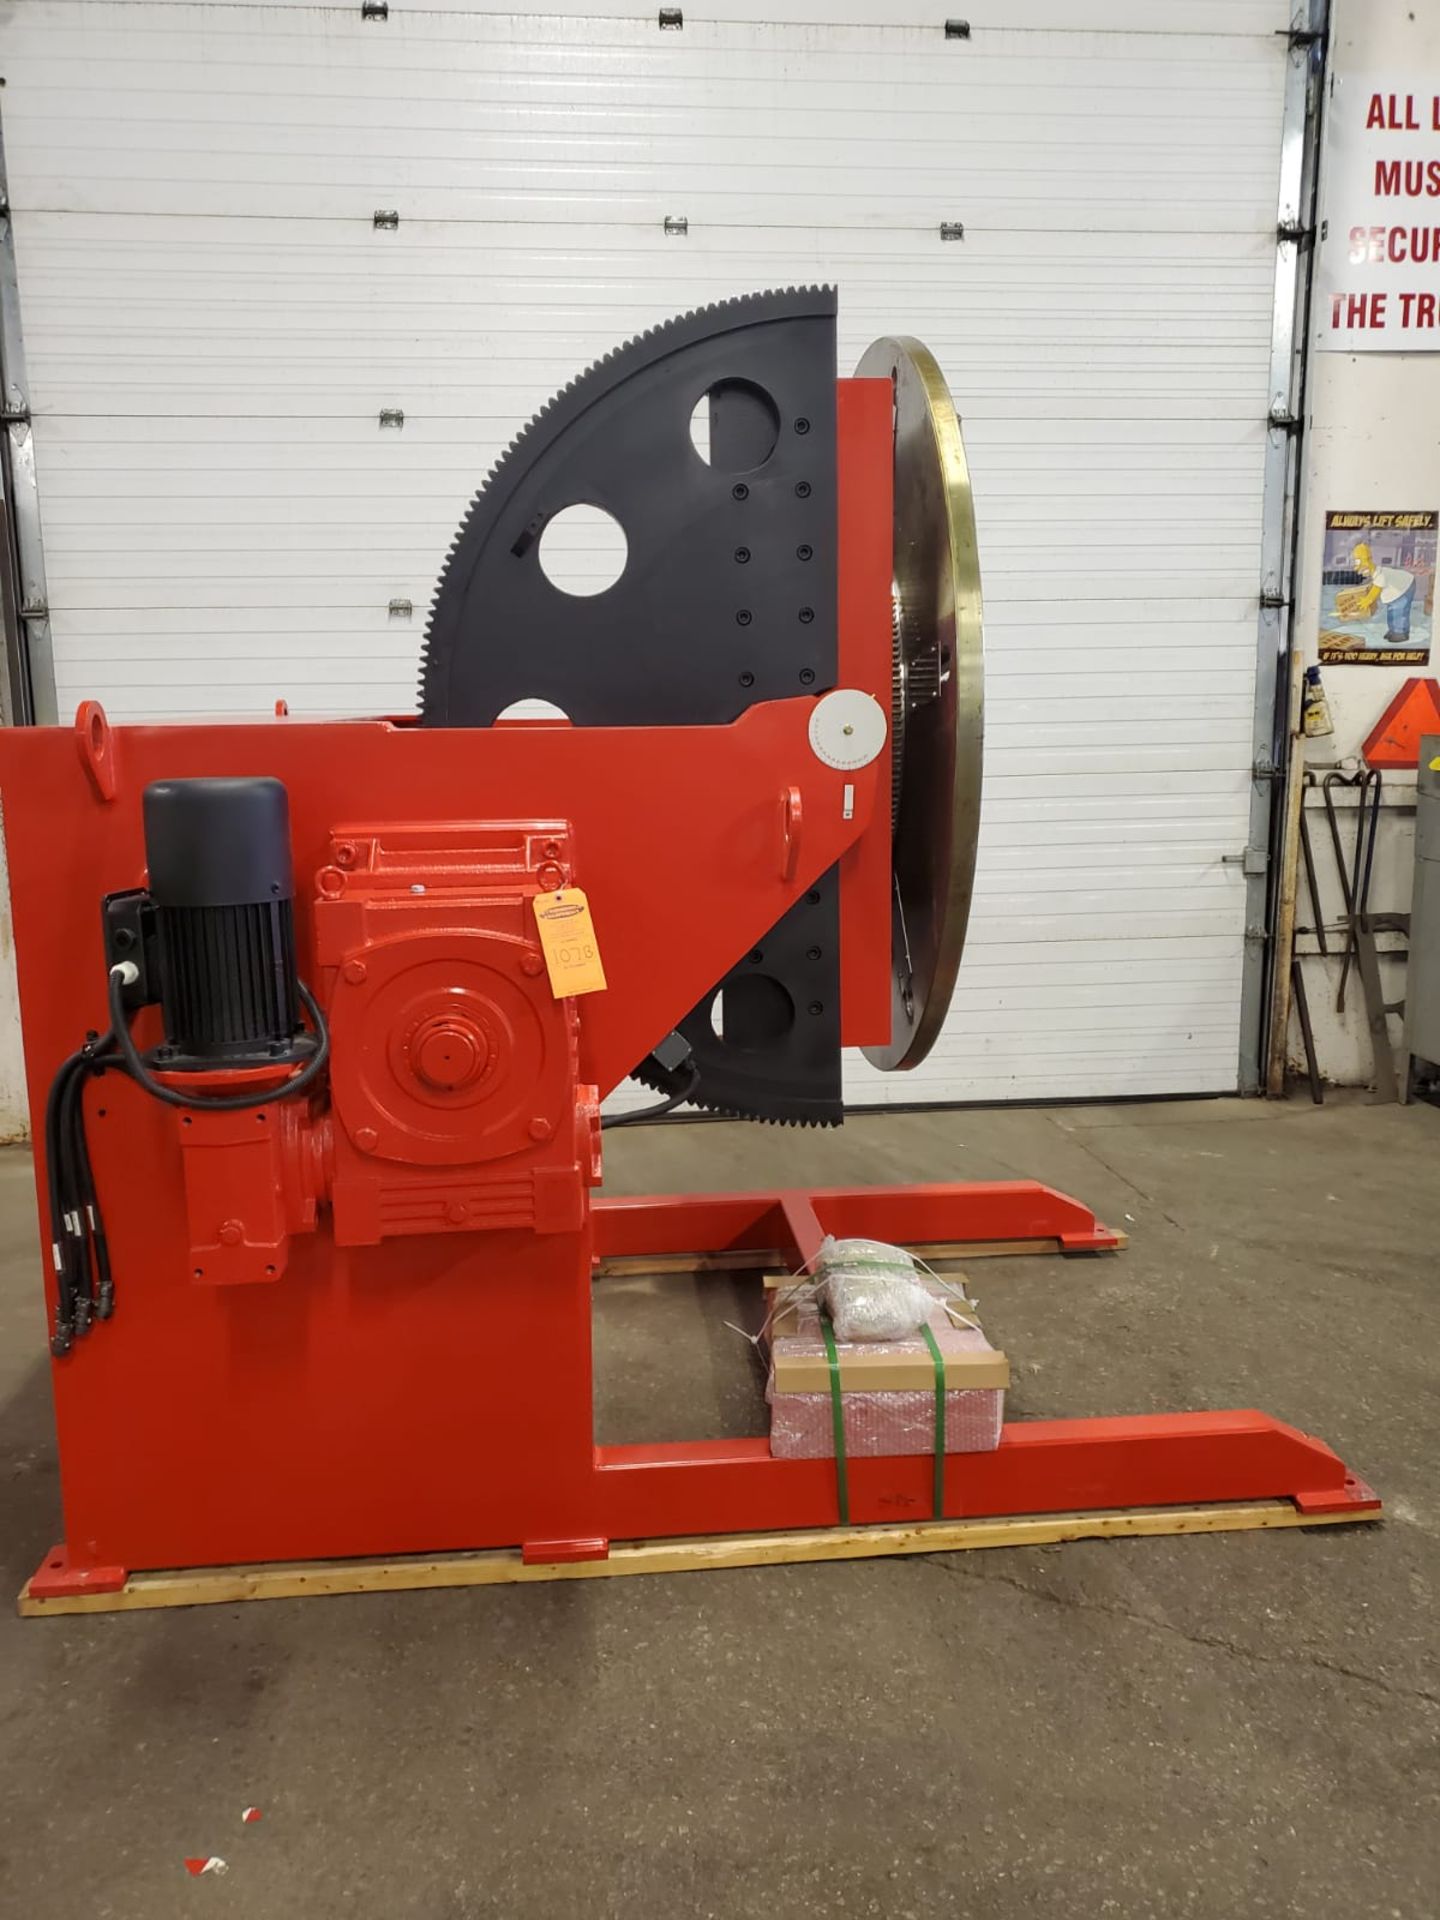 Verner model VD-15000 WELDING POSITIONER 15000lbs capacity - tilt and rotate with variable speed